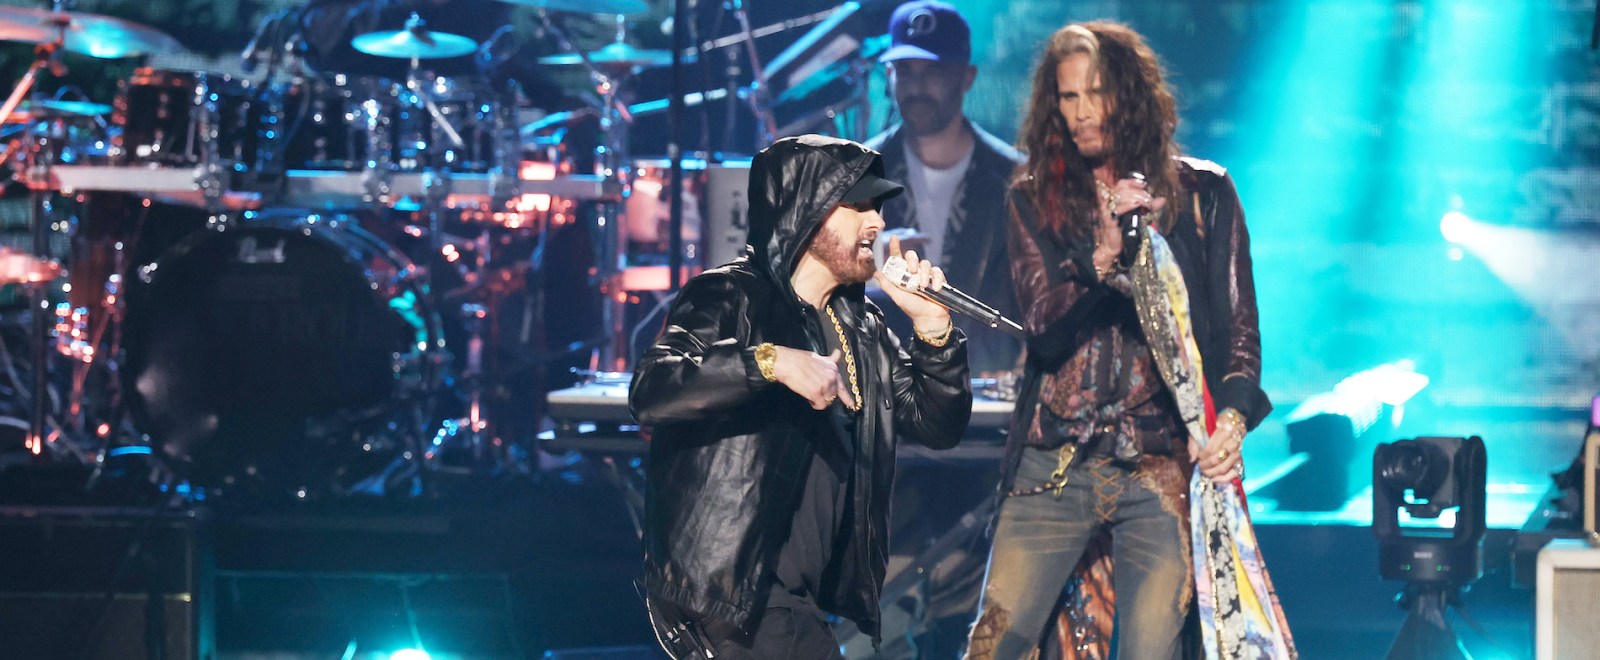 Eminem Steven Tyler 2022 Rock And Roll Hall Of Fame Induction Ceremony